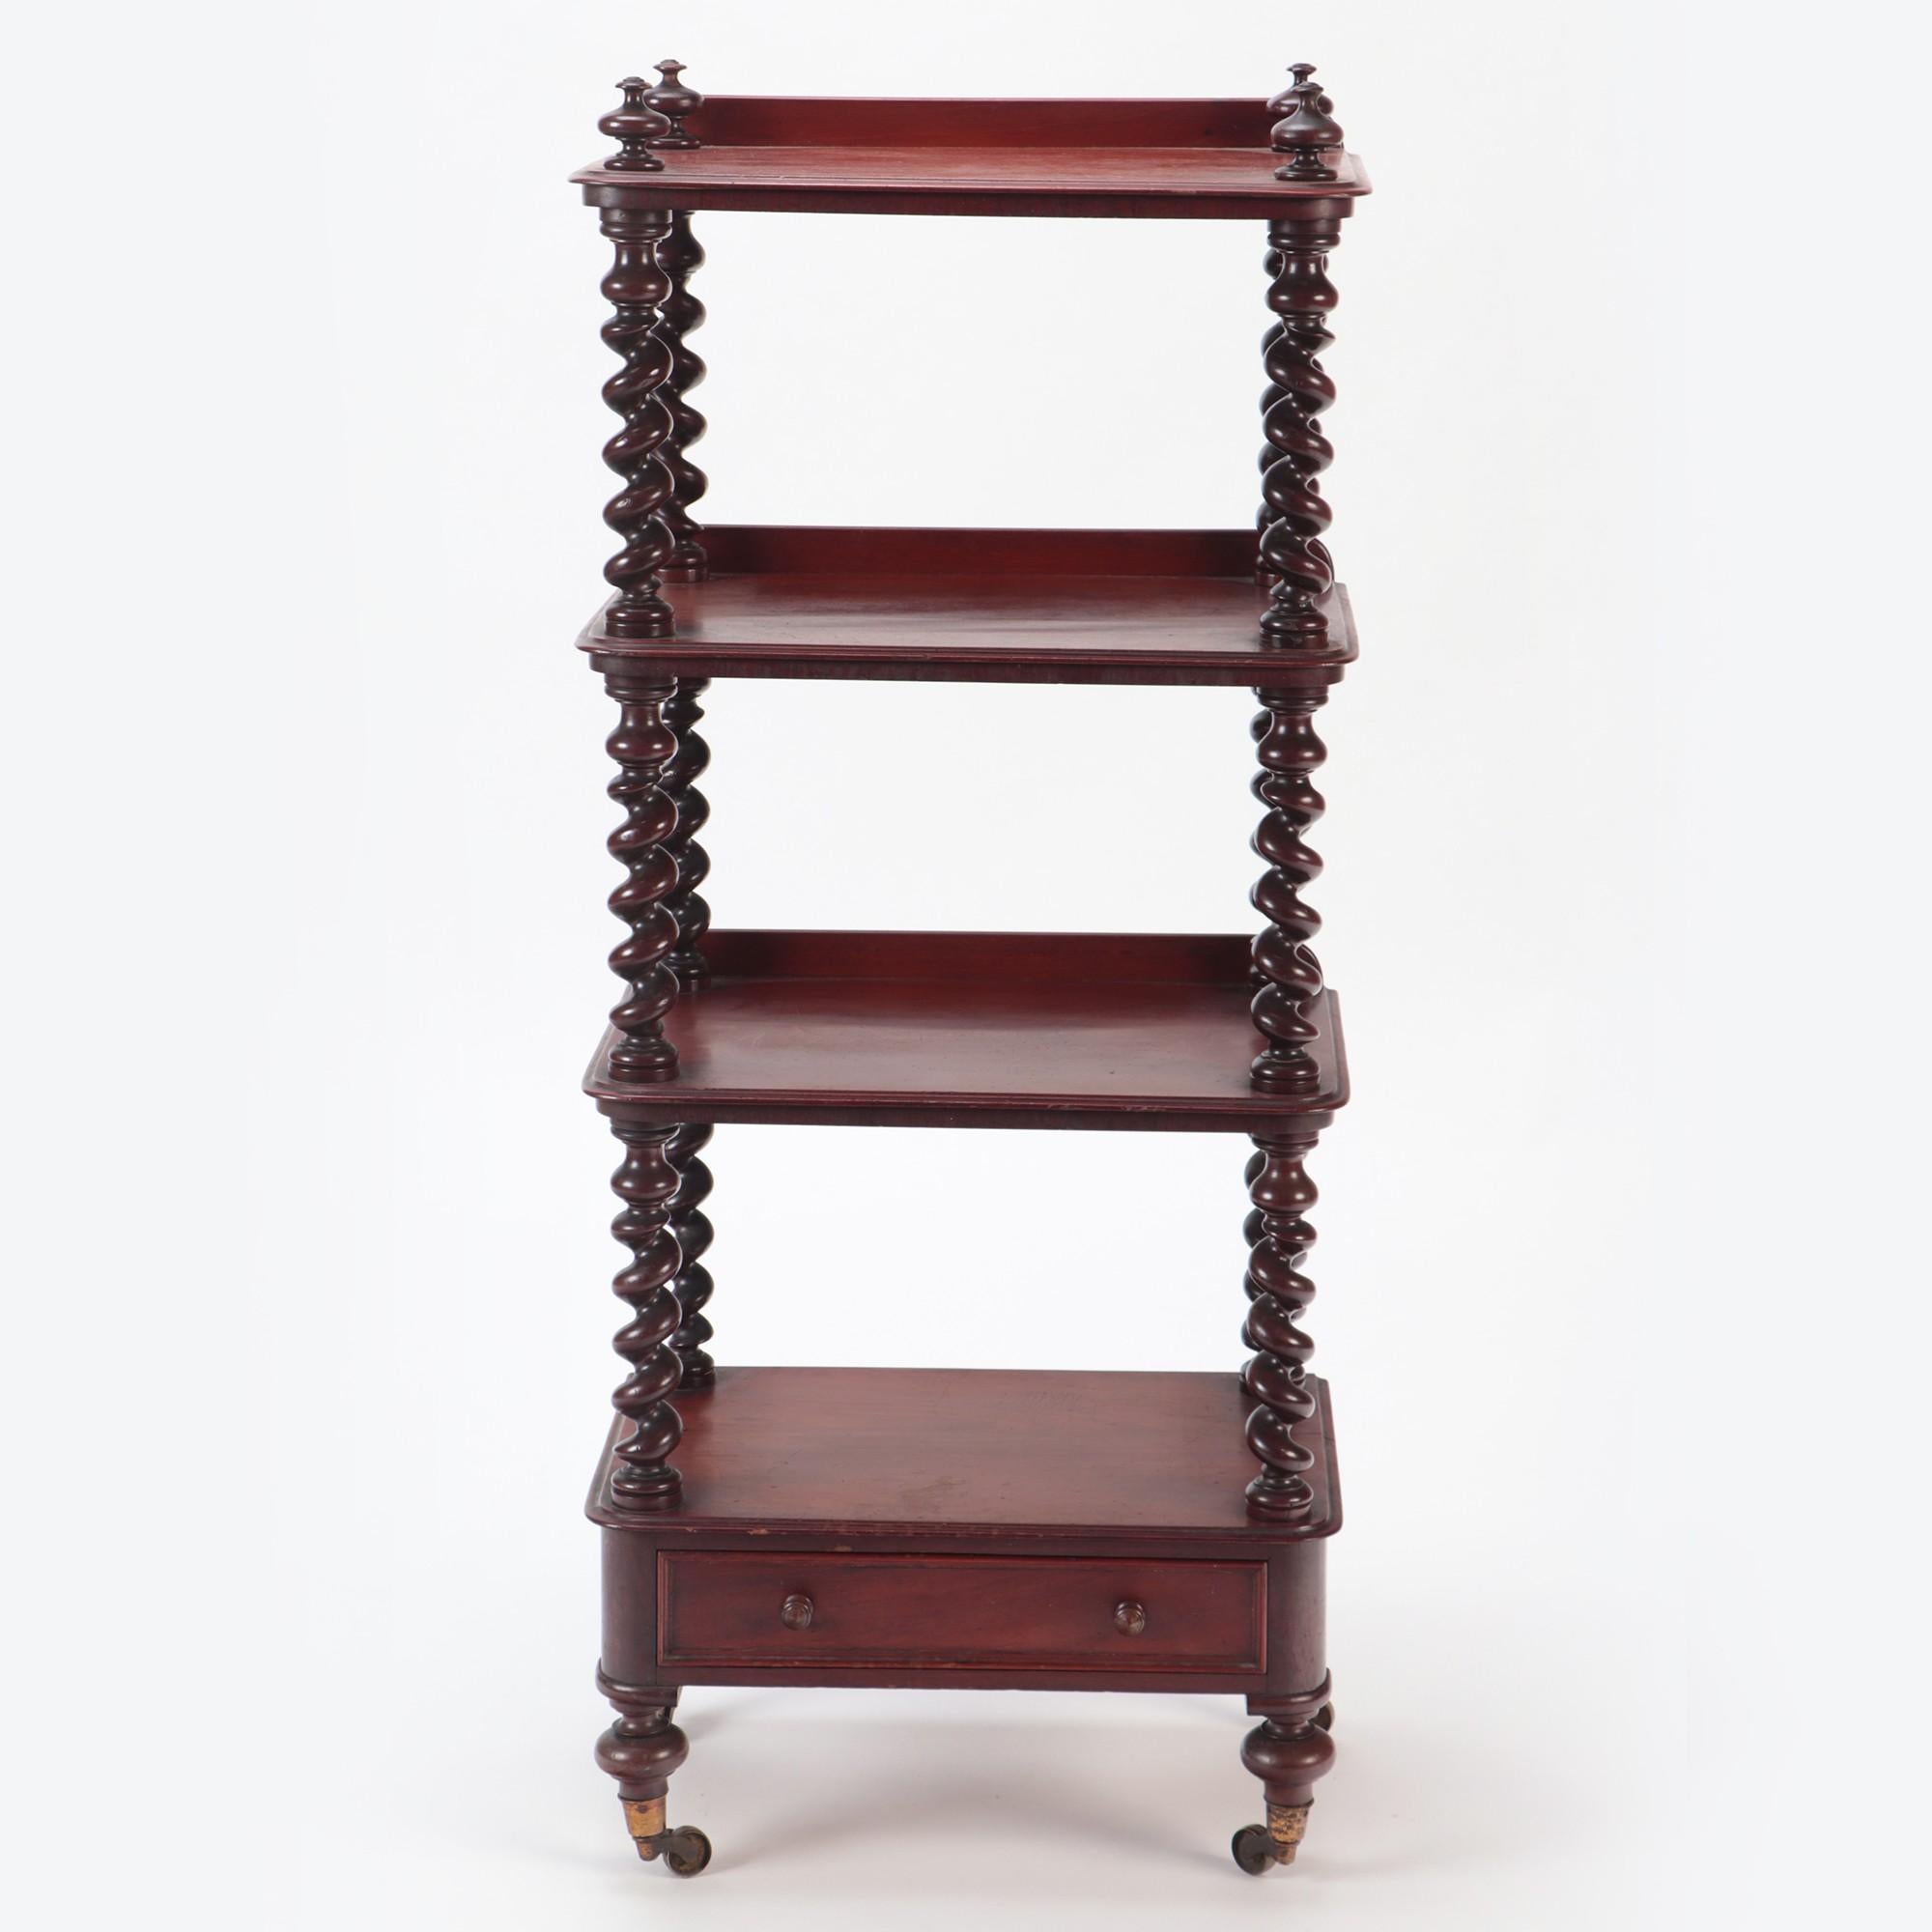 A French four shelves mahogany Etagère, 19th C. The shelves are separated by hand turned barley twist shelf supports. Last shelve has a drawer below. The Etagere rests on turned feet ending with the original brass casters.